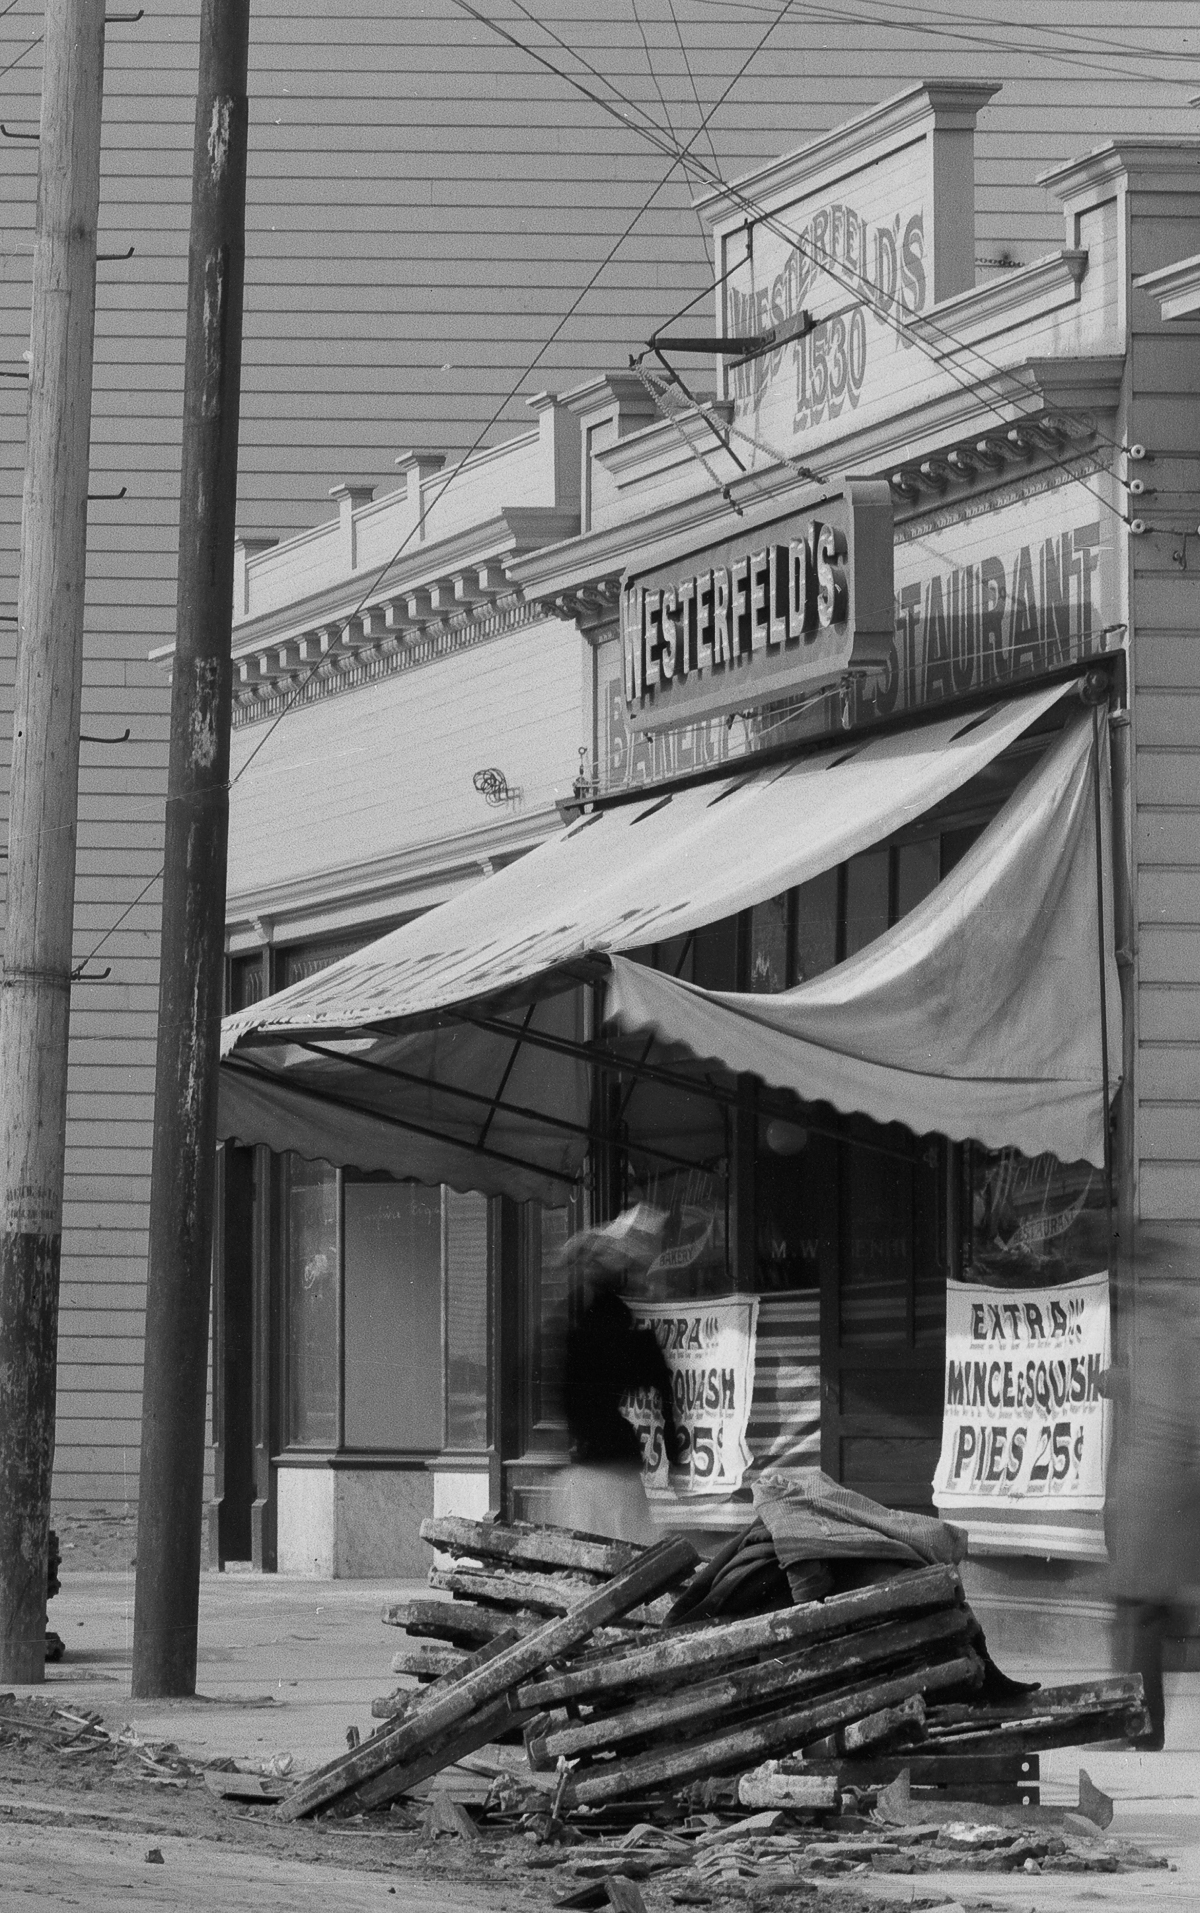 Thanksgiving Pies at Westerfeld's Bakery and Restaurant, 1530 Haight Street | November 23, 1906 | U01063